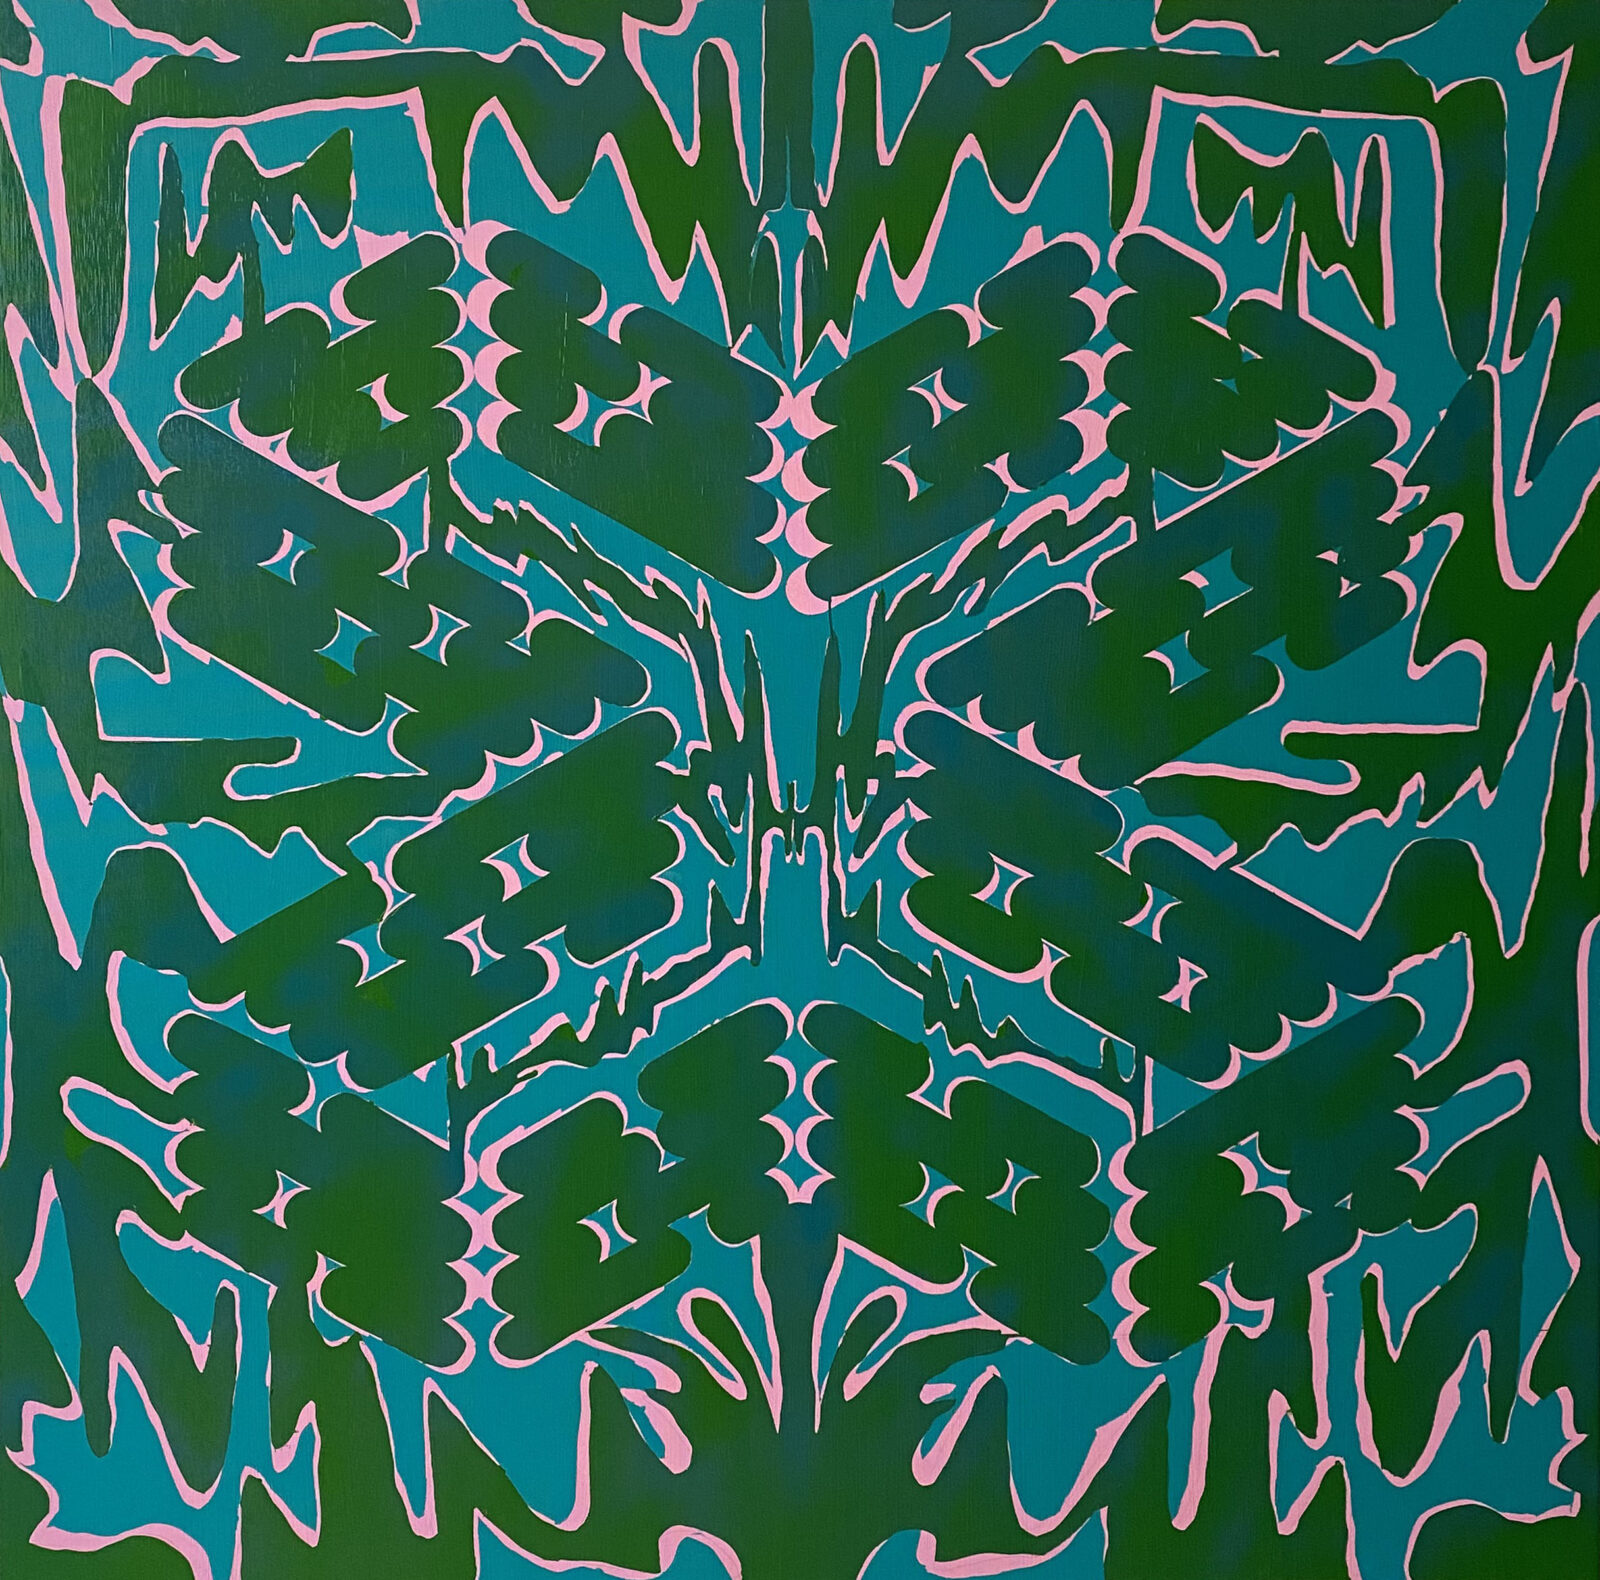 "Traditional trip", 2020, acrylic and oil on canvas, 150x150 cm